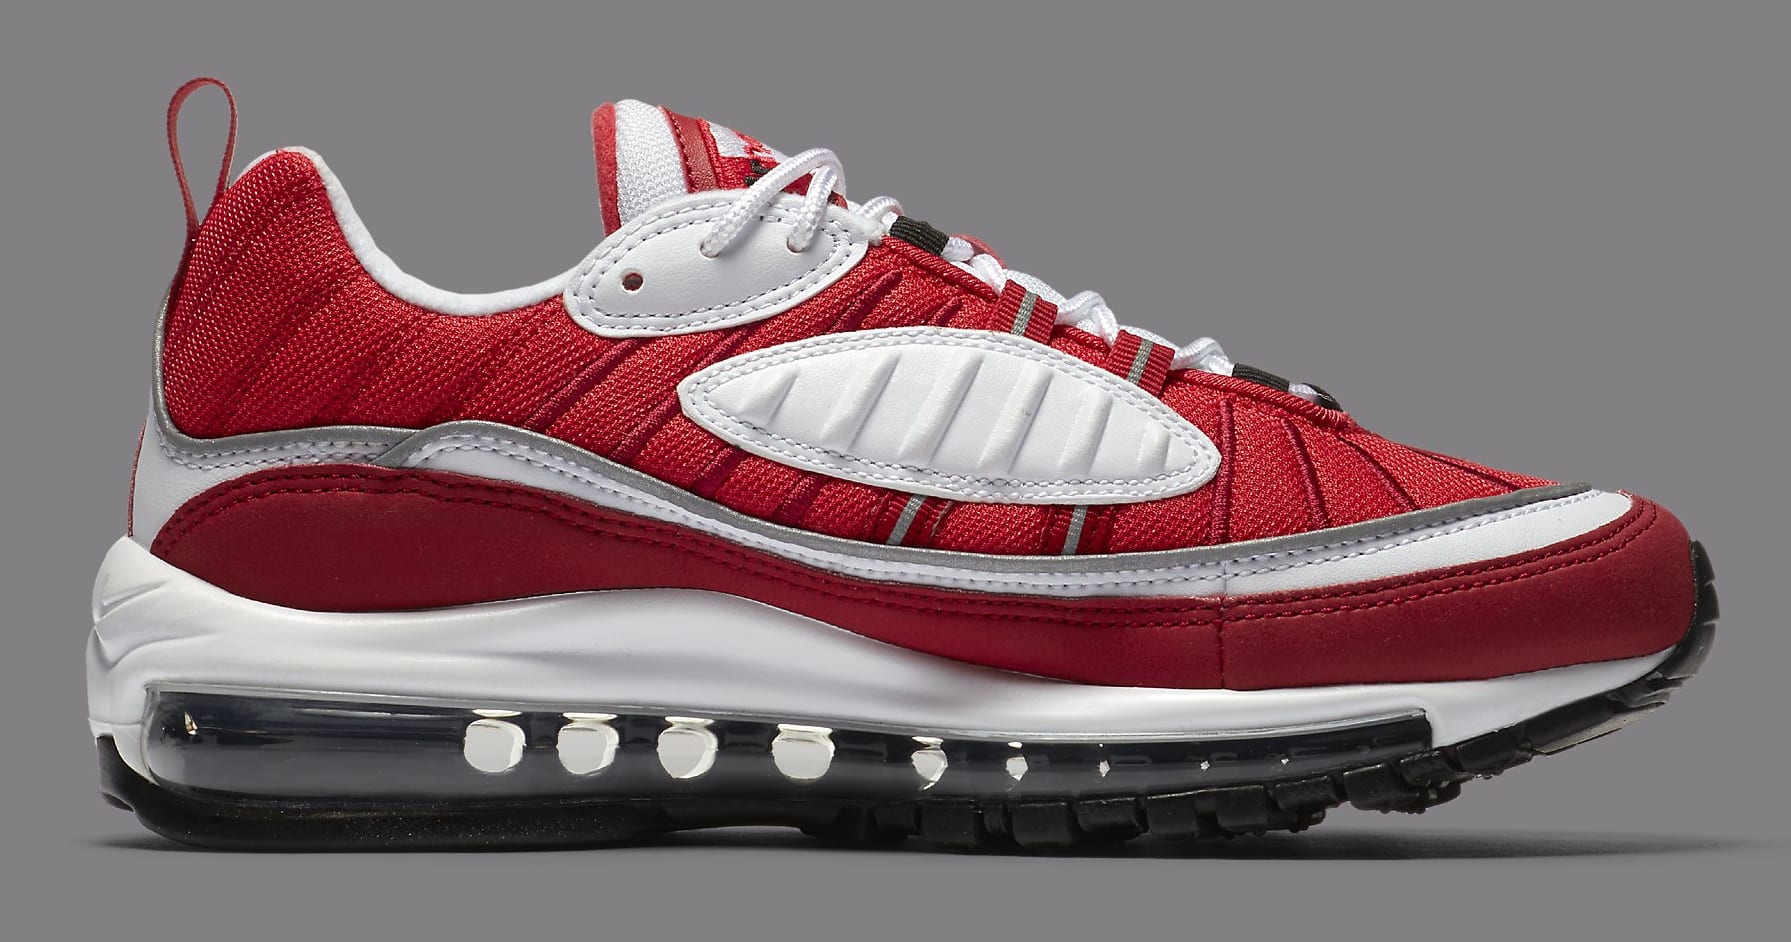 Nike Air Max 98 White/Black-Gym Red-Reflect Silver AH6799-101 (Medial)